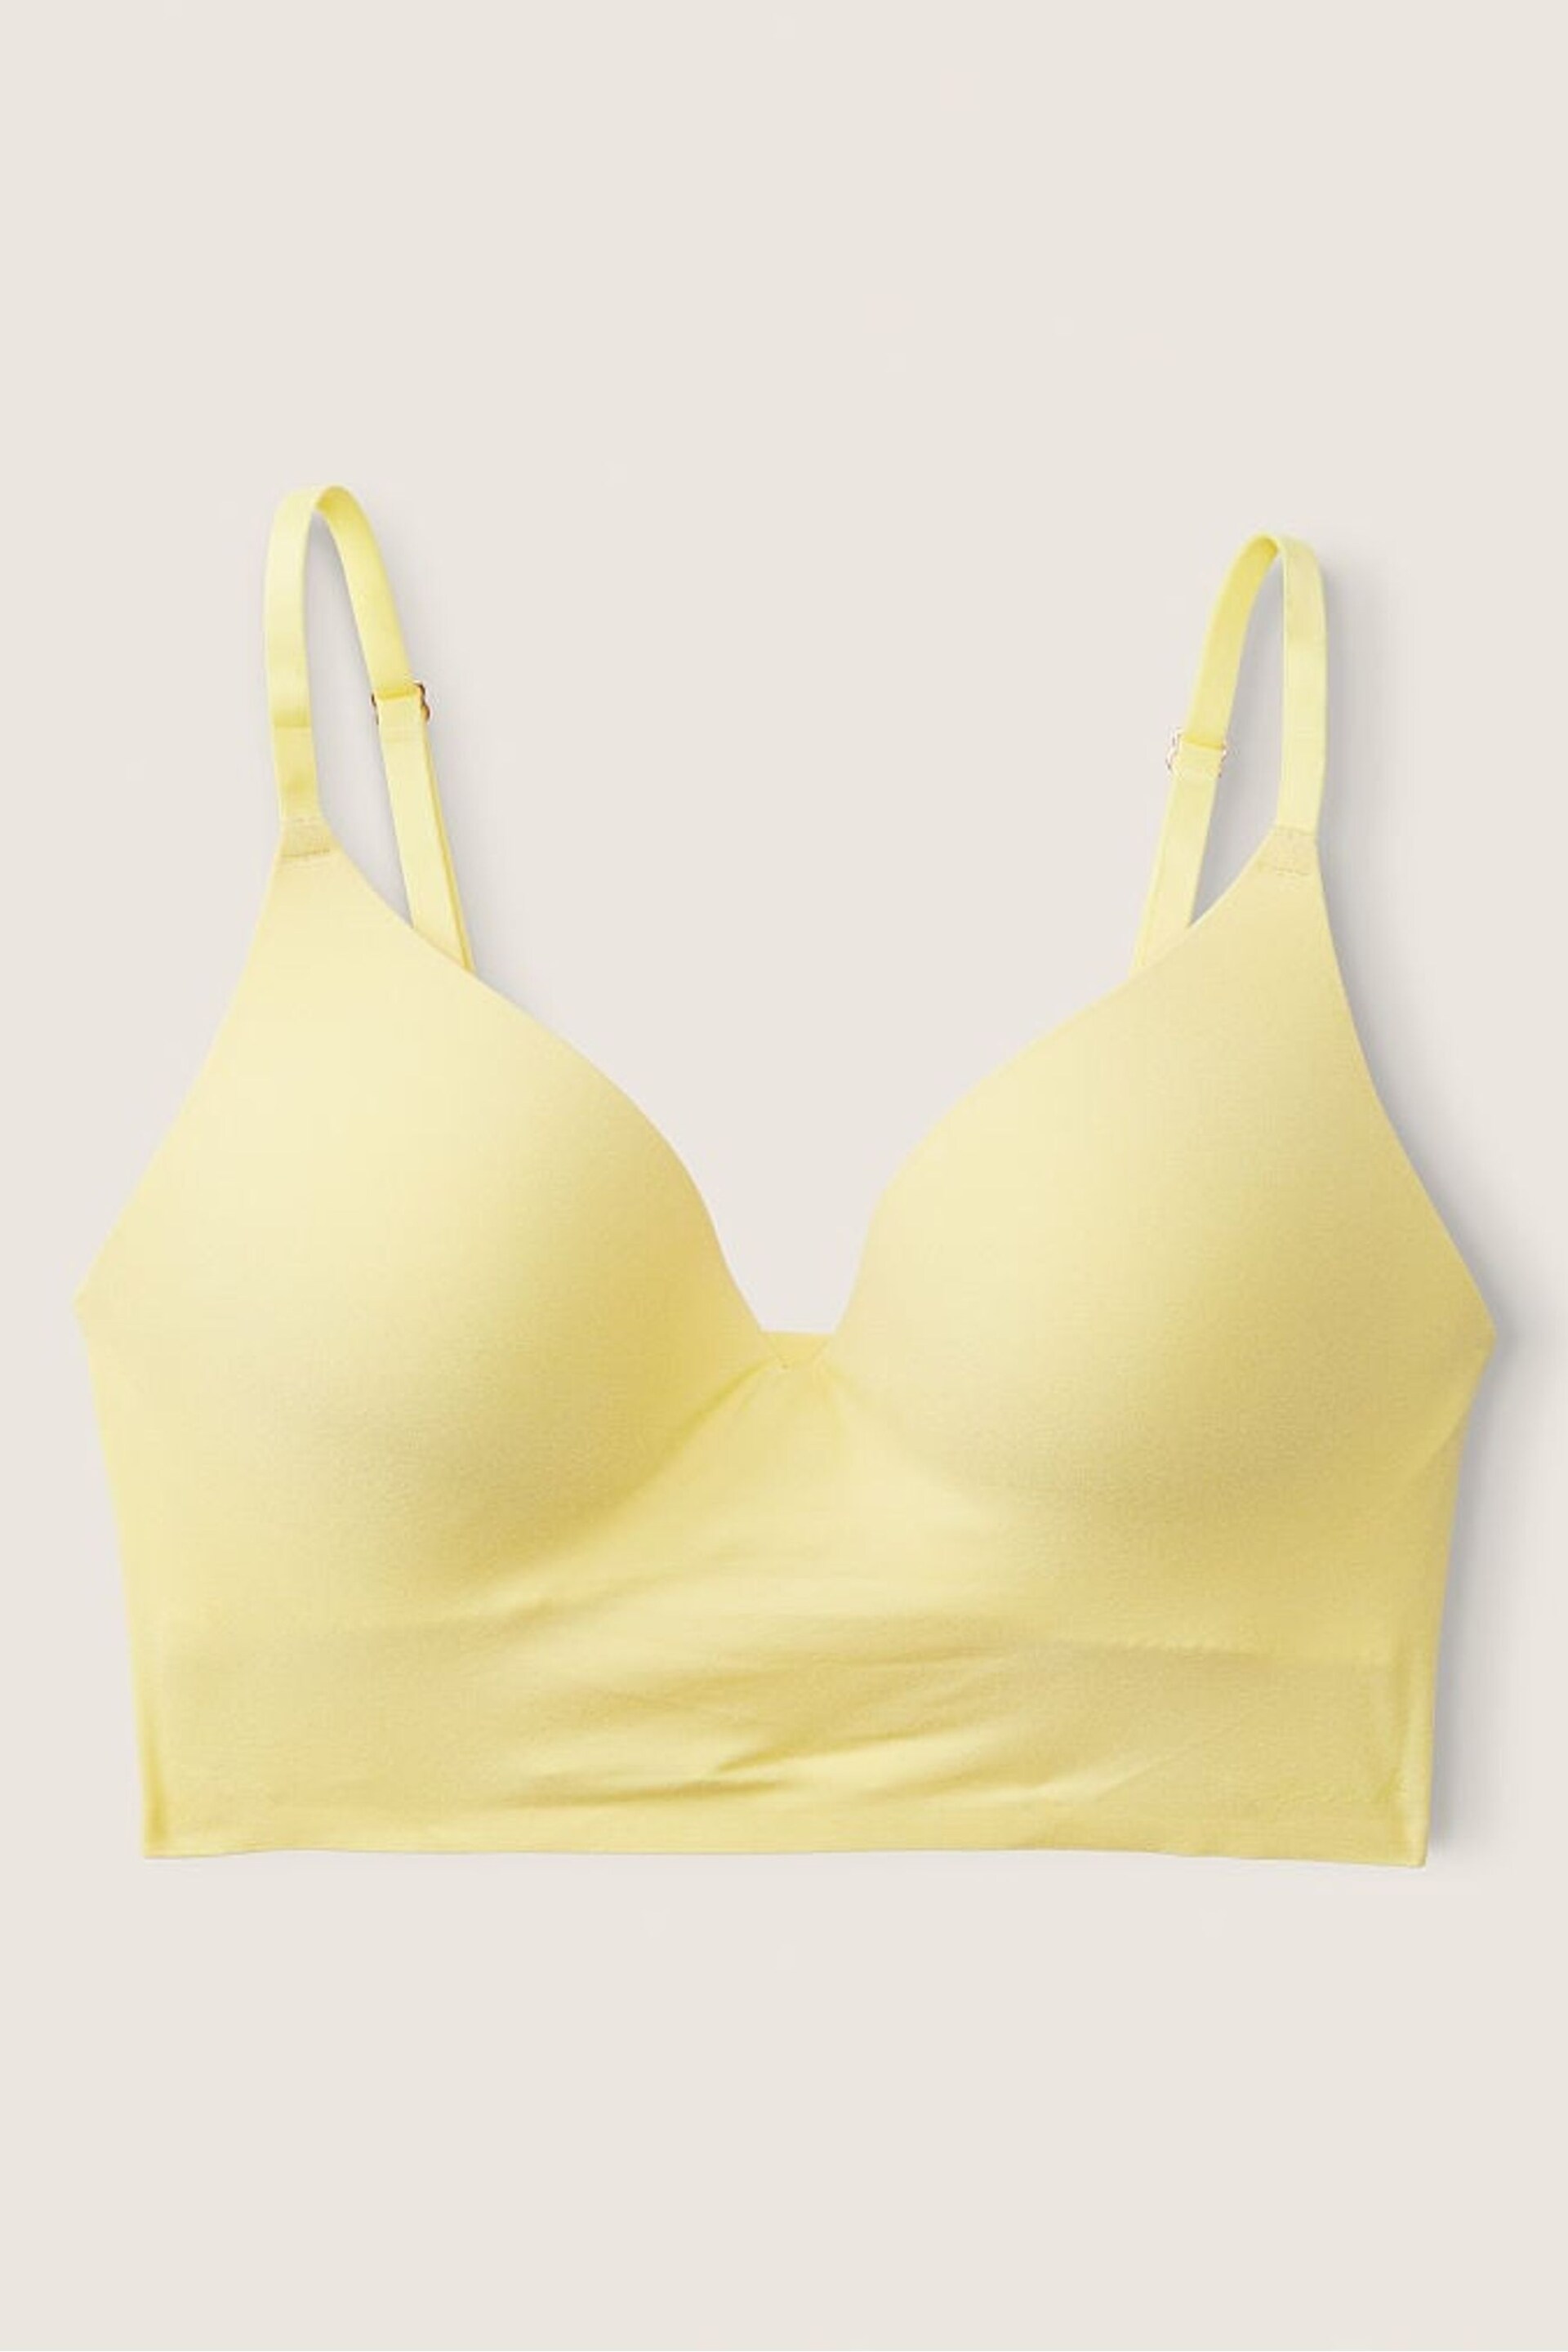 Victoria's Secret PINK Yellow Tulip Smooth Non Wired Push Up Bralette - Image 1 of 1